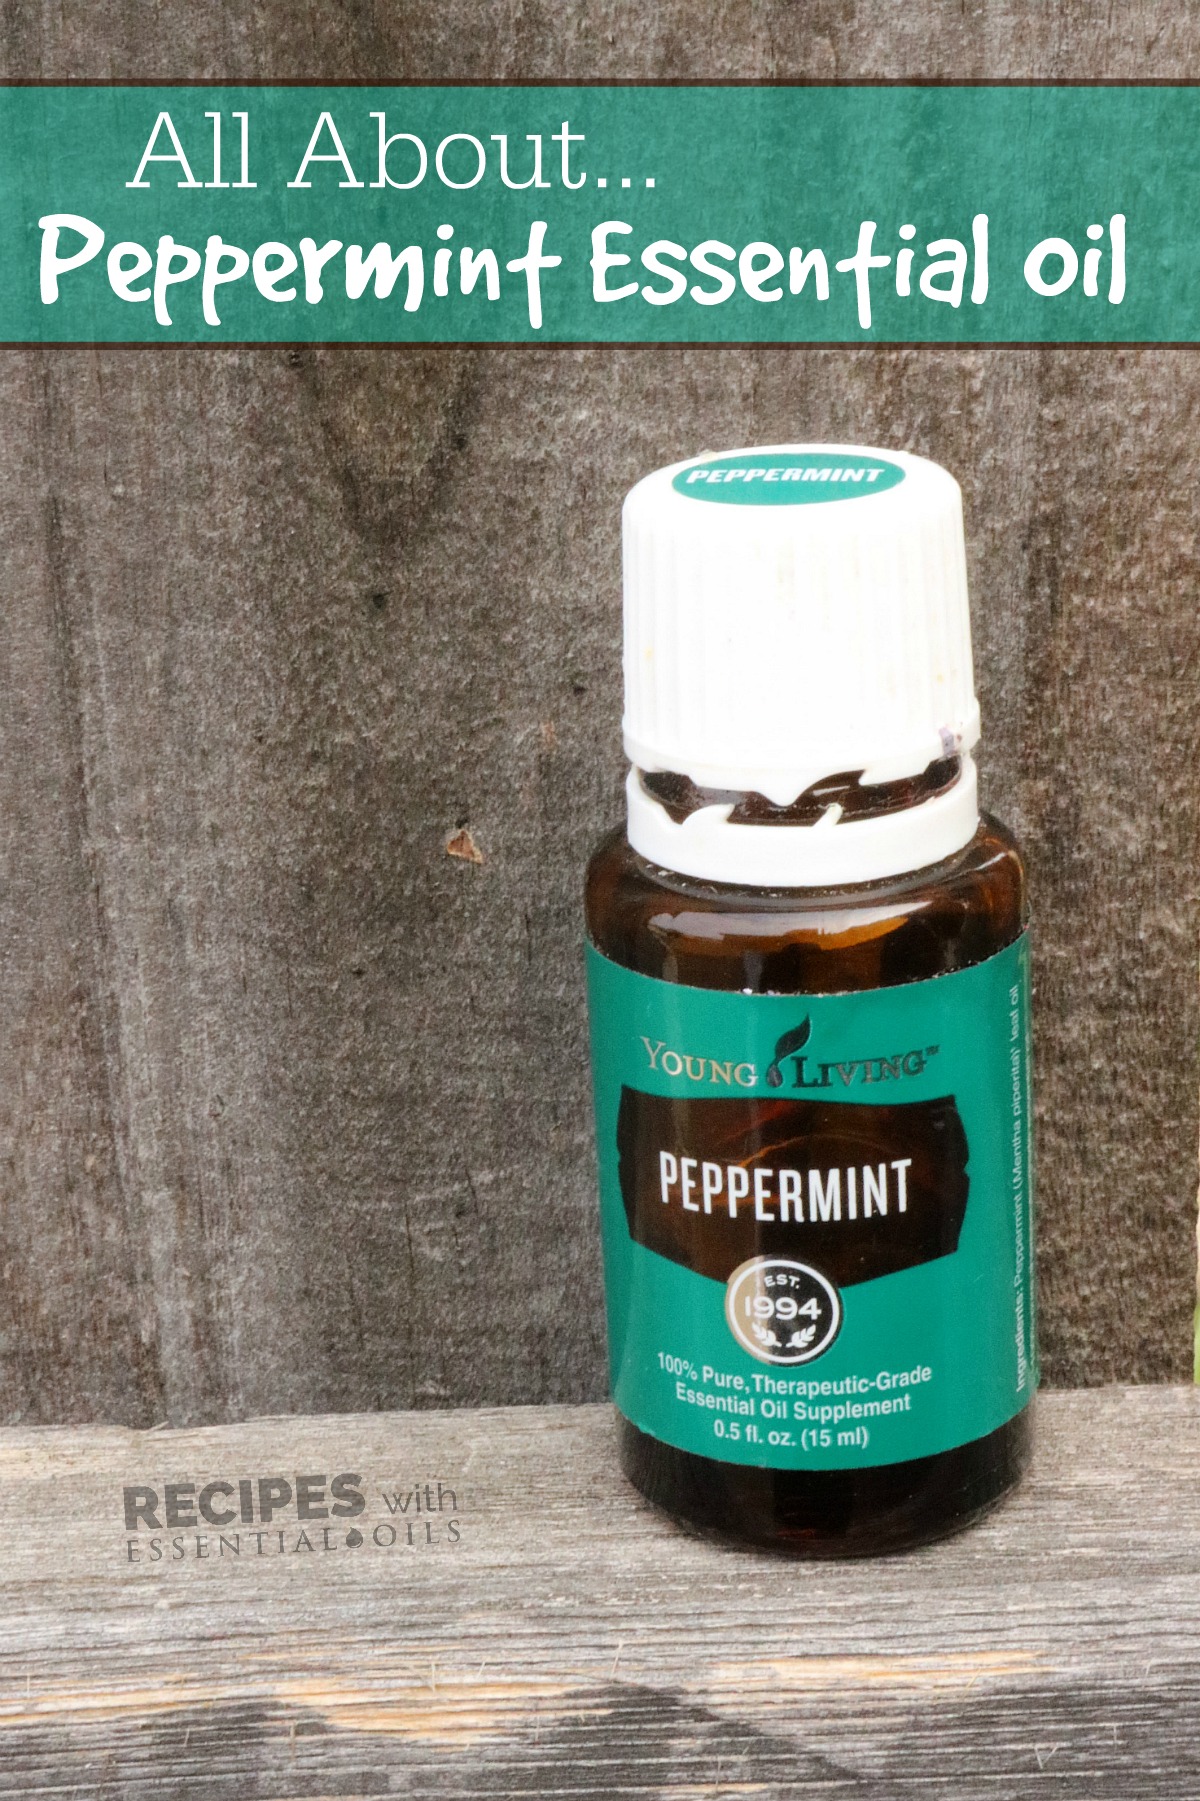 All About Peppermint Essential Oil from RecipeswithEssentialOils.com